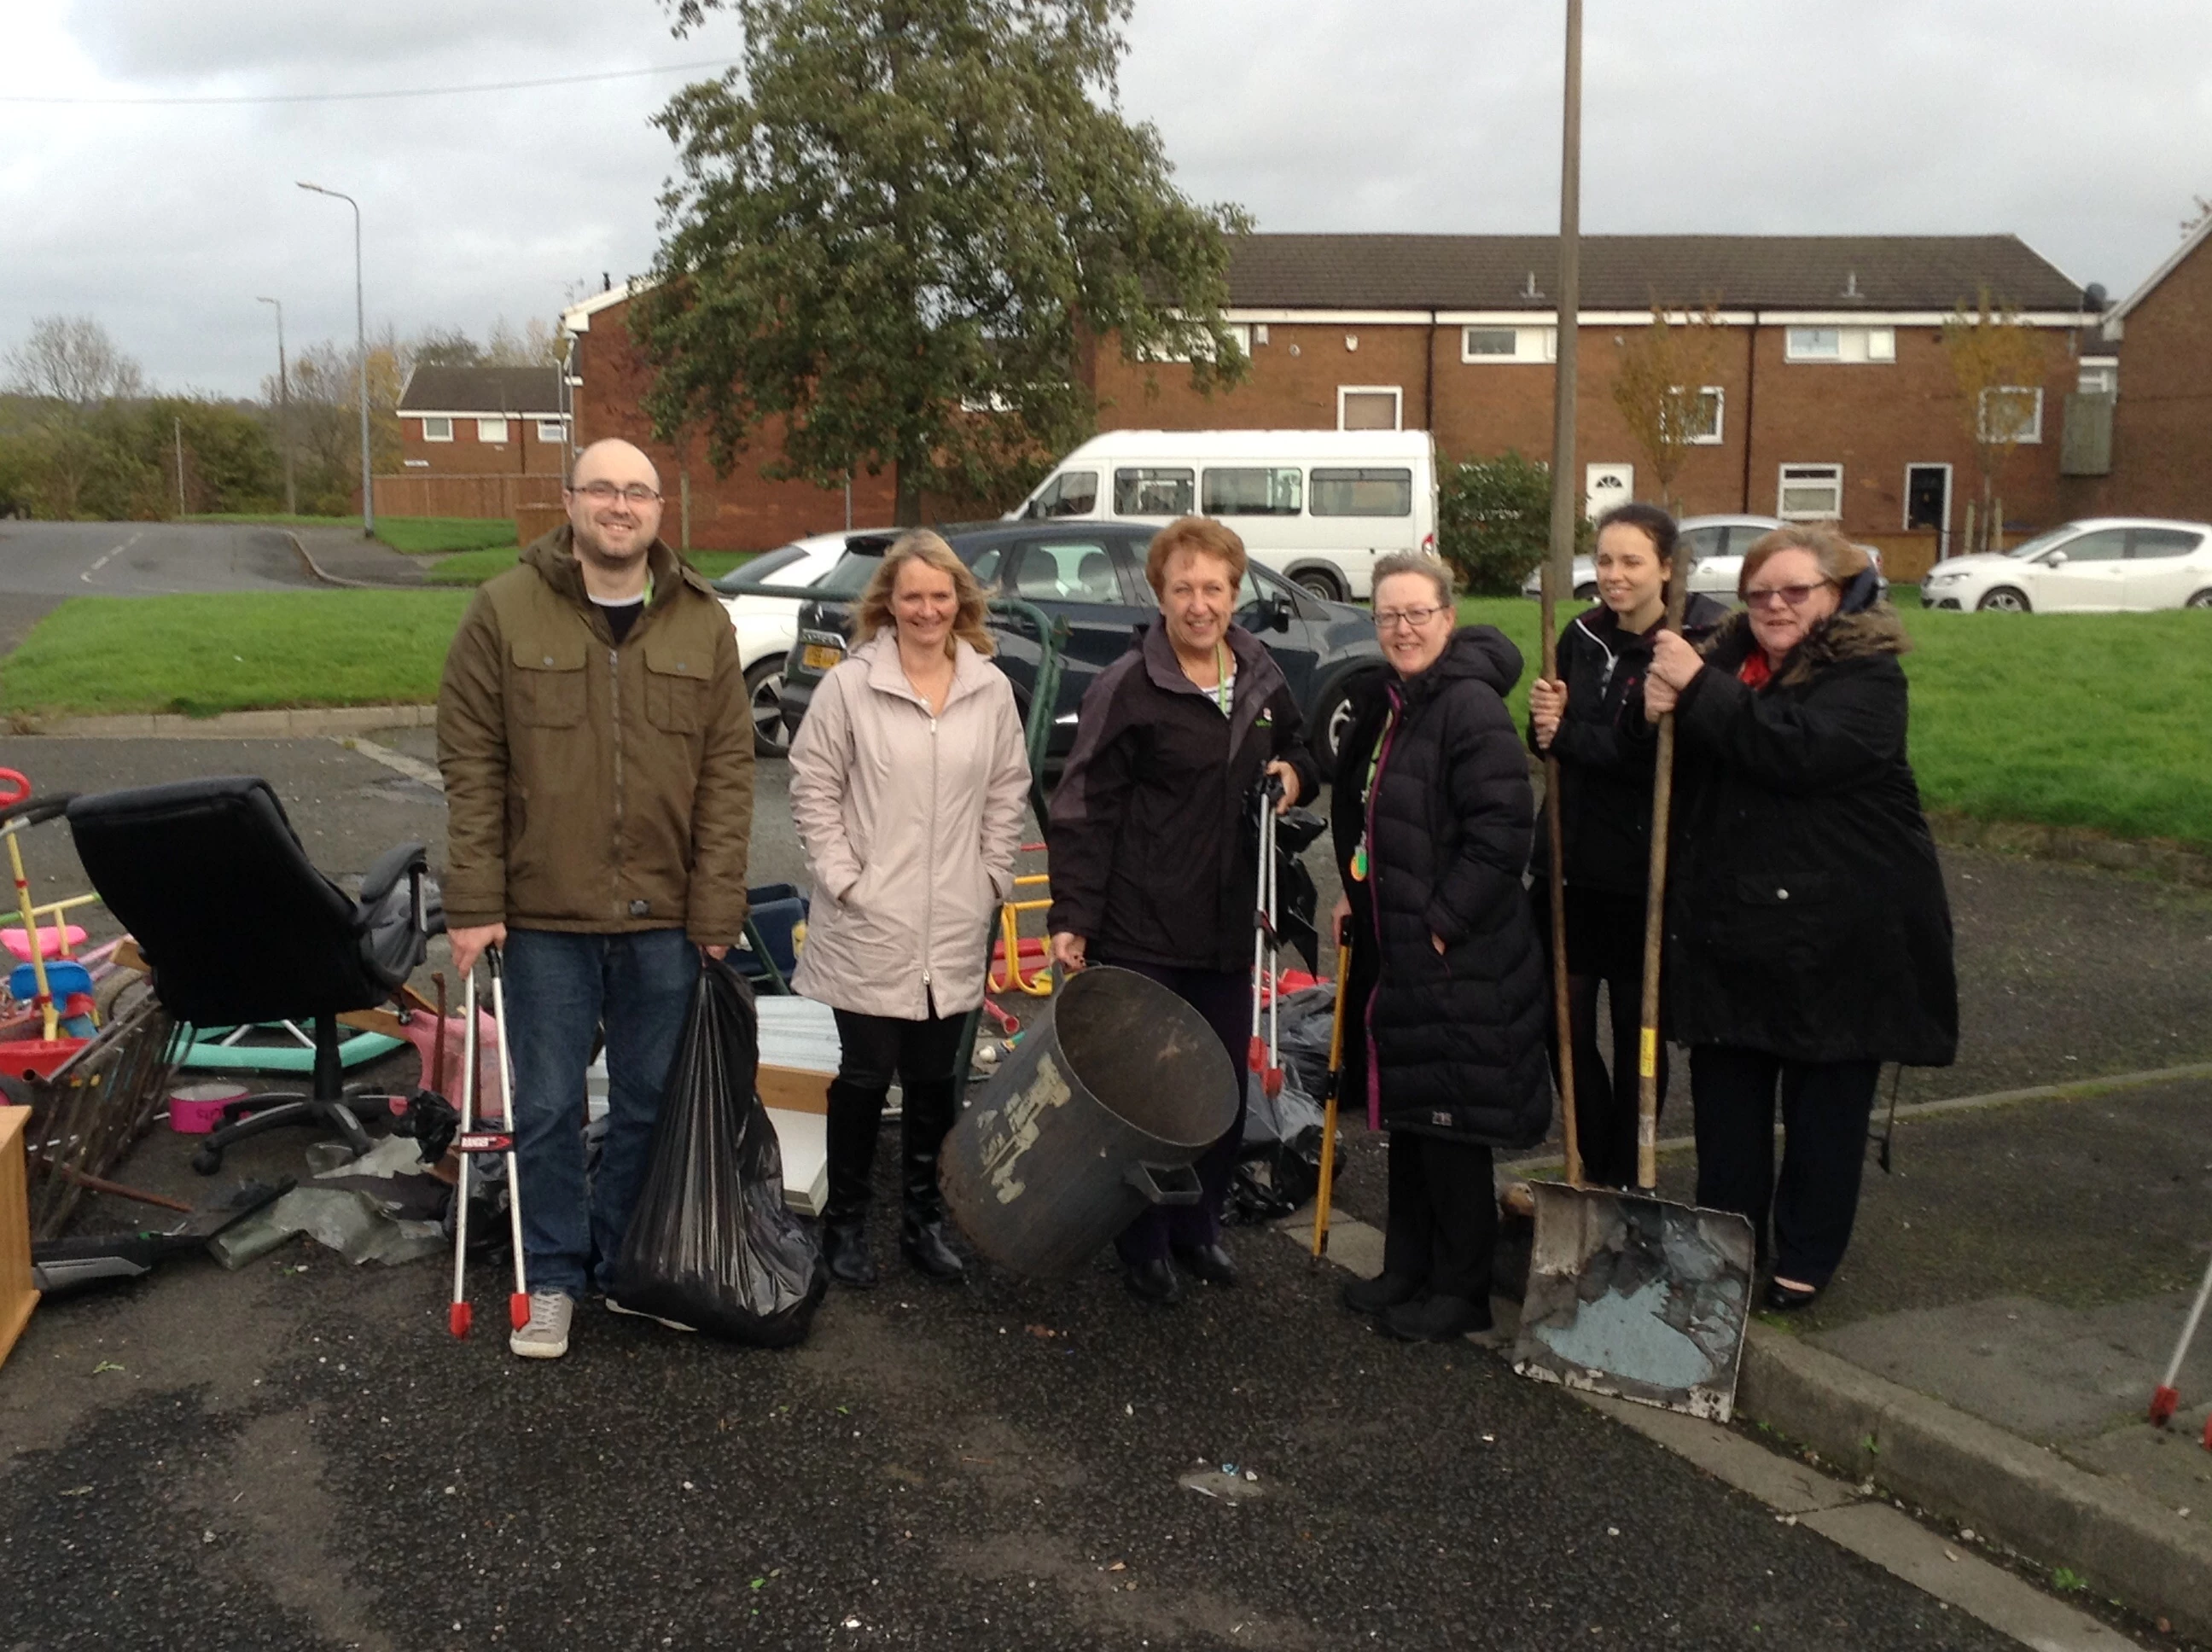 The Whit Lane estate has been transformed thanks to a community clean-up.